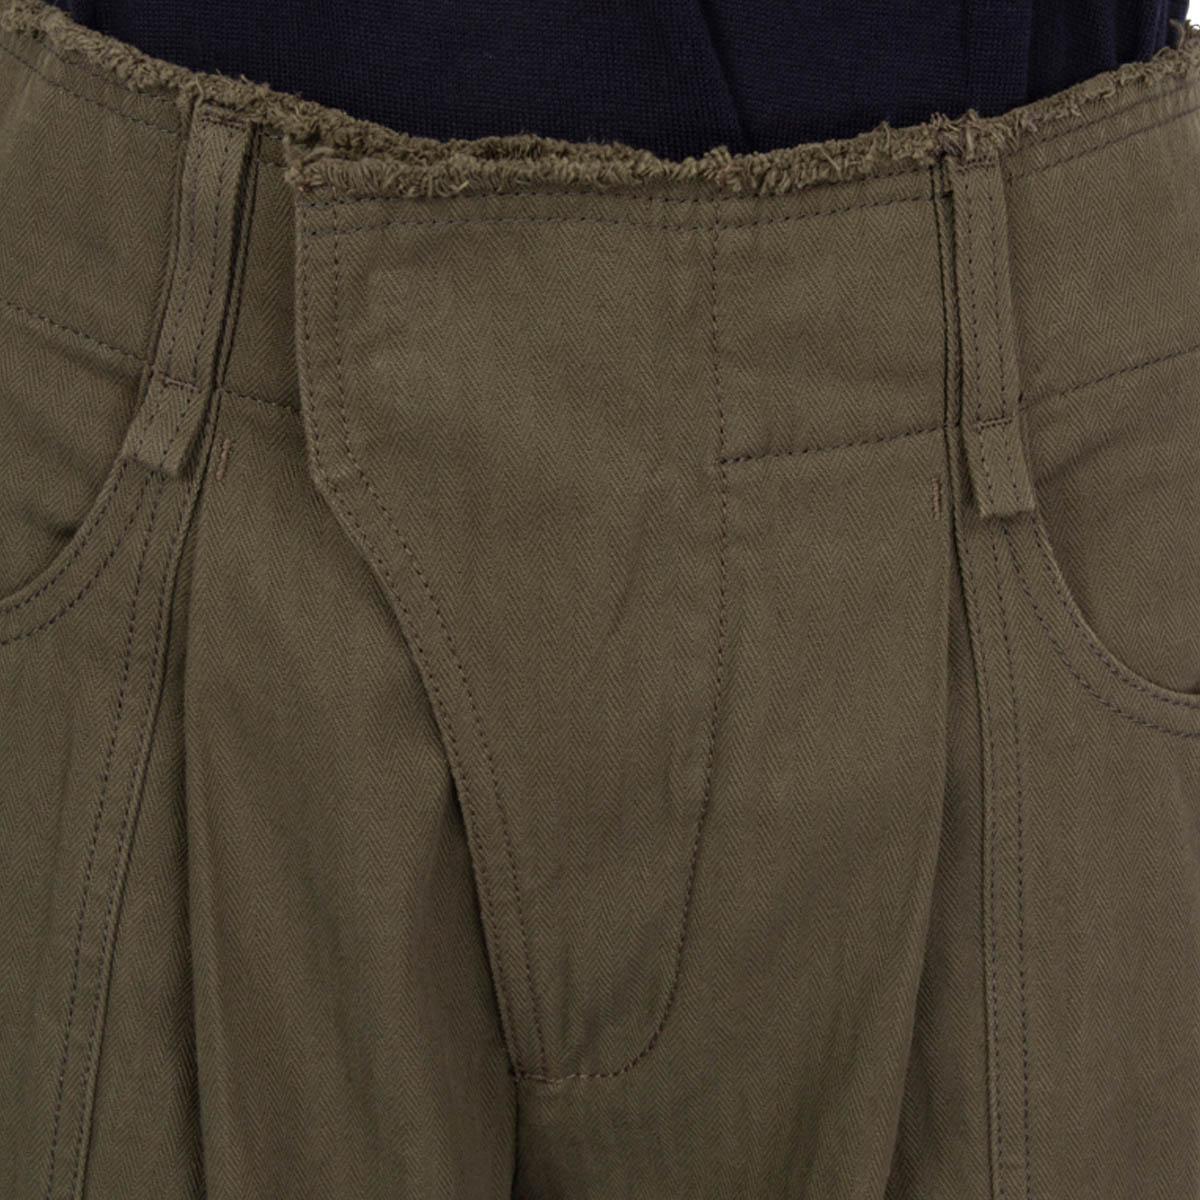 Women's CHLOE olive green cotton FRAYED WIDE Pants 38 S